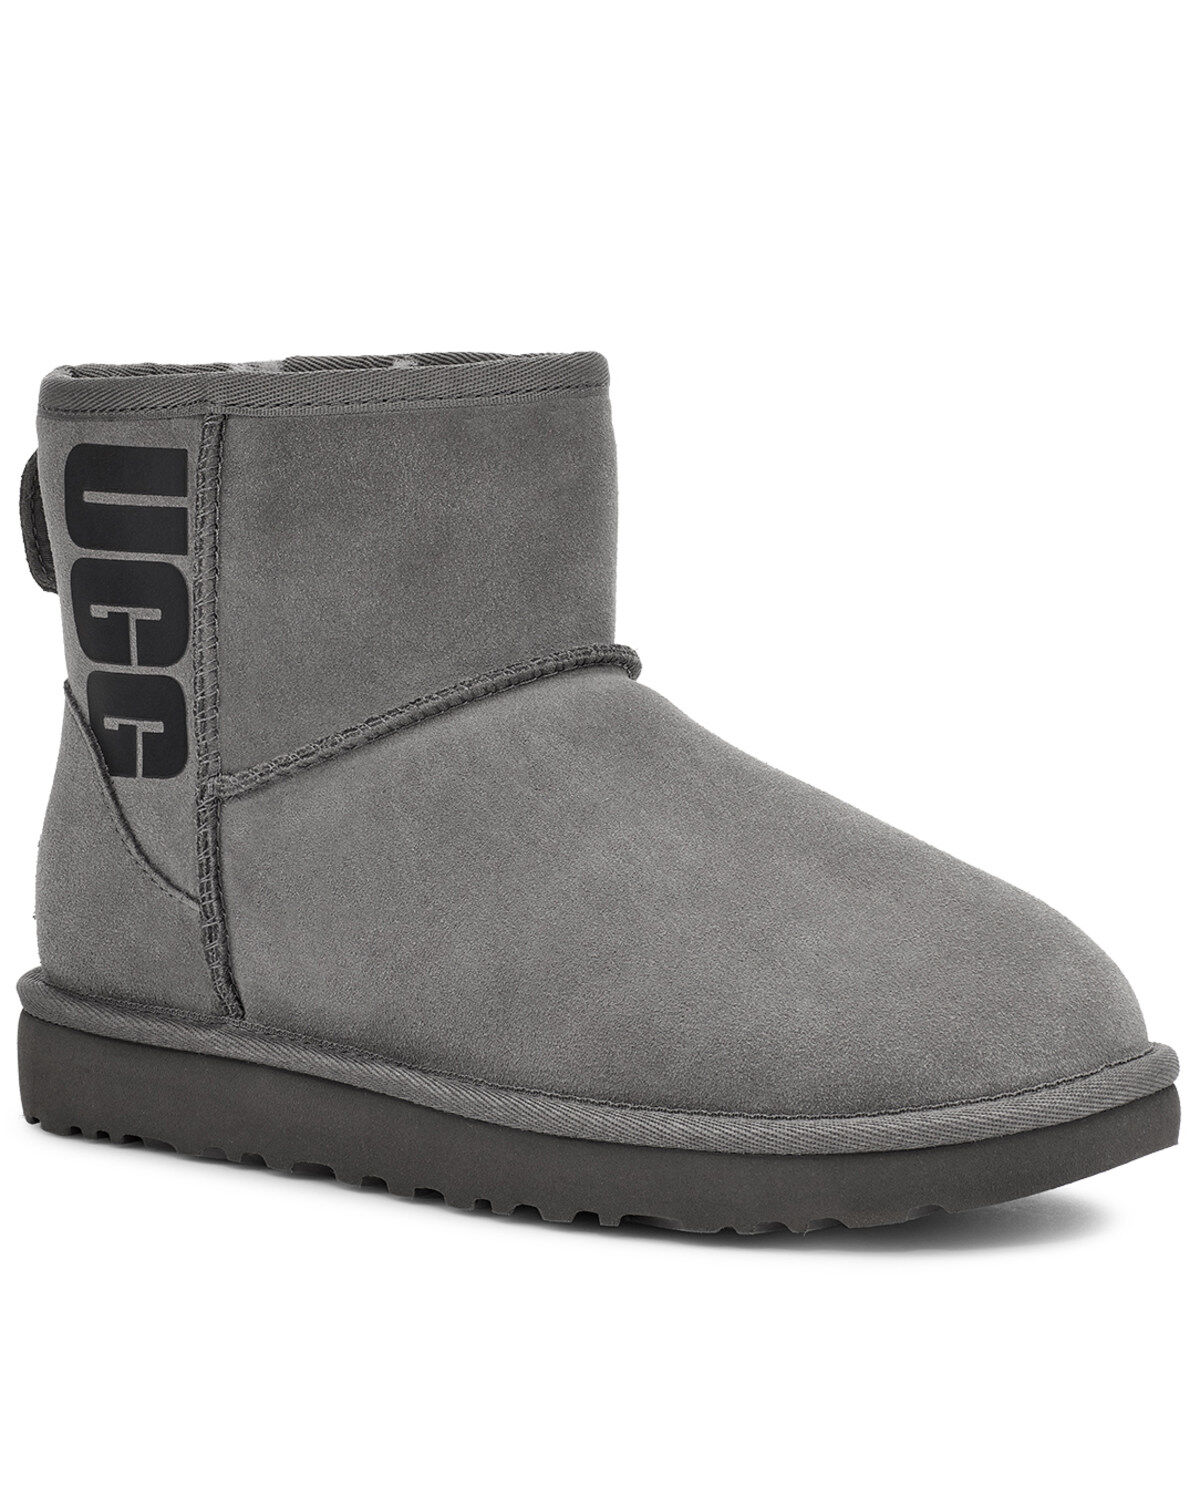 grey ugg boots for women